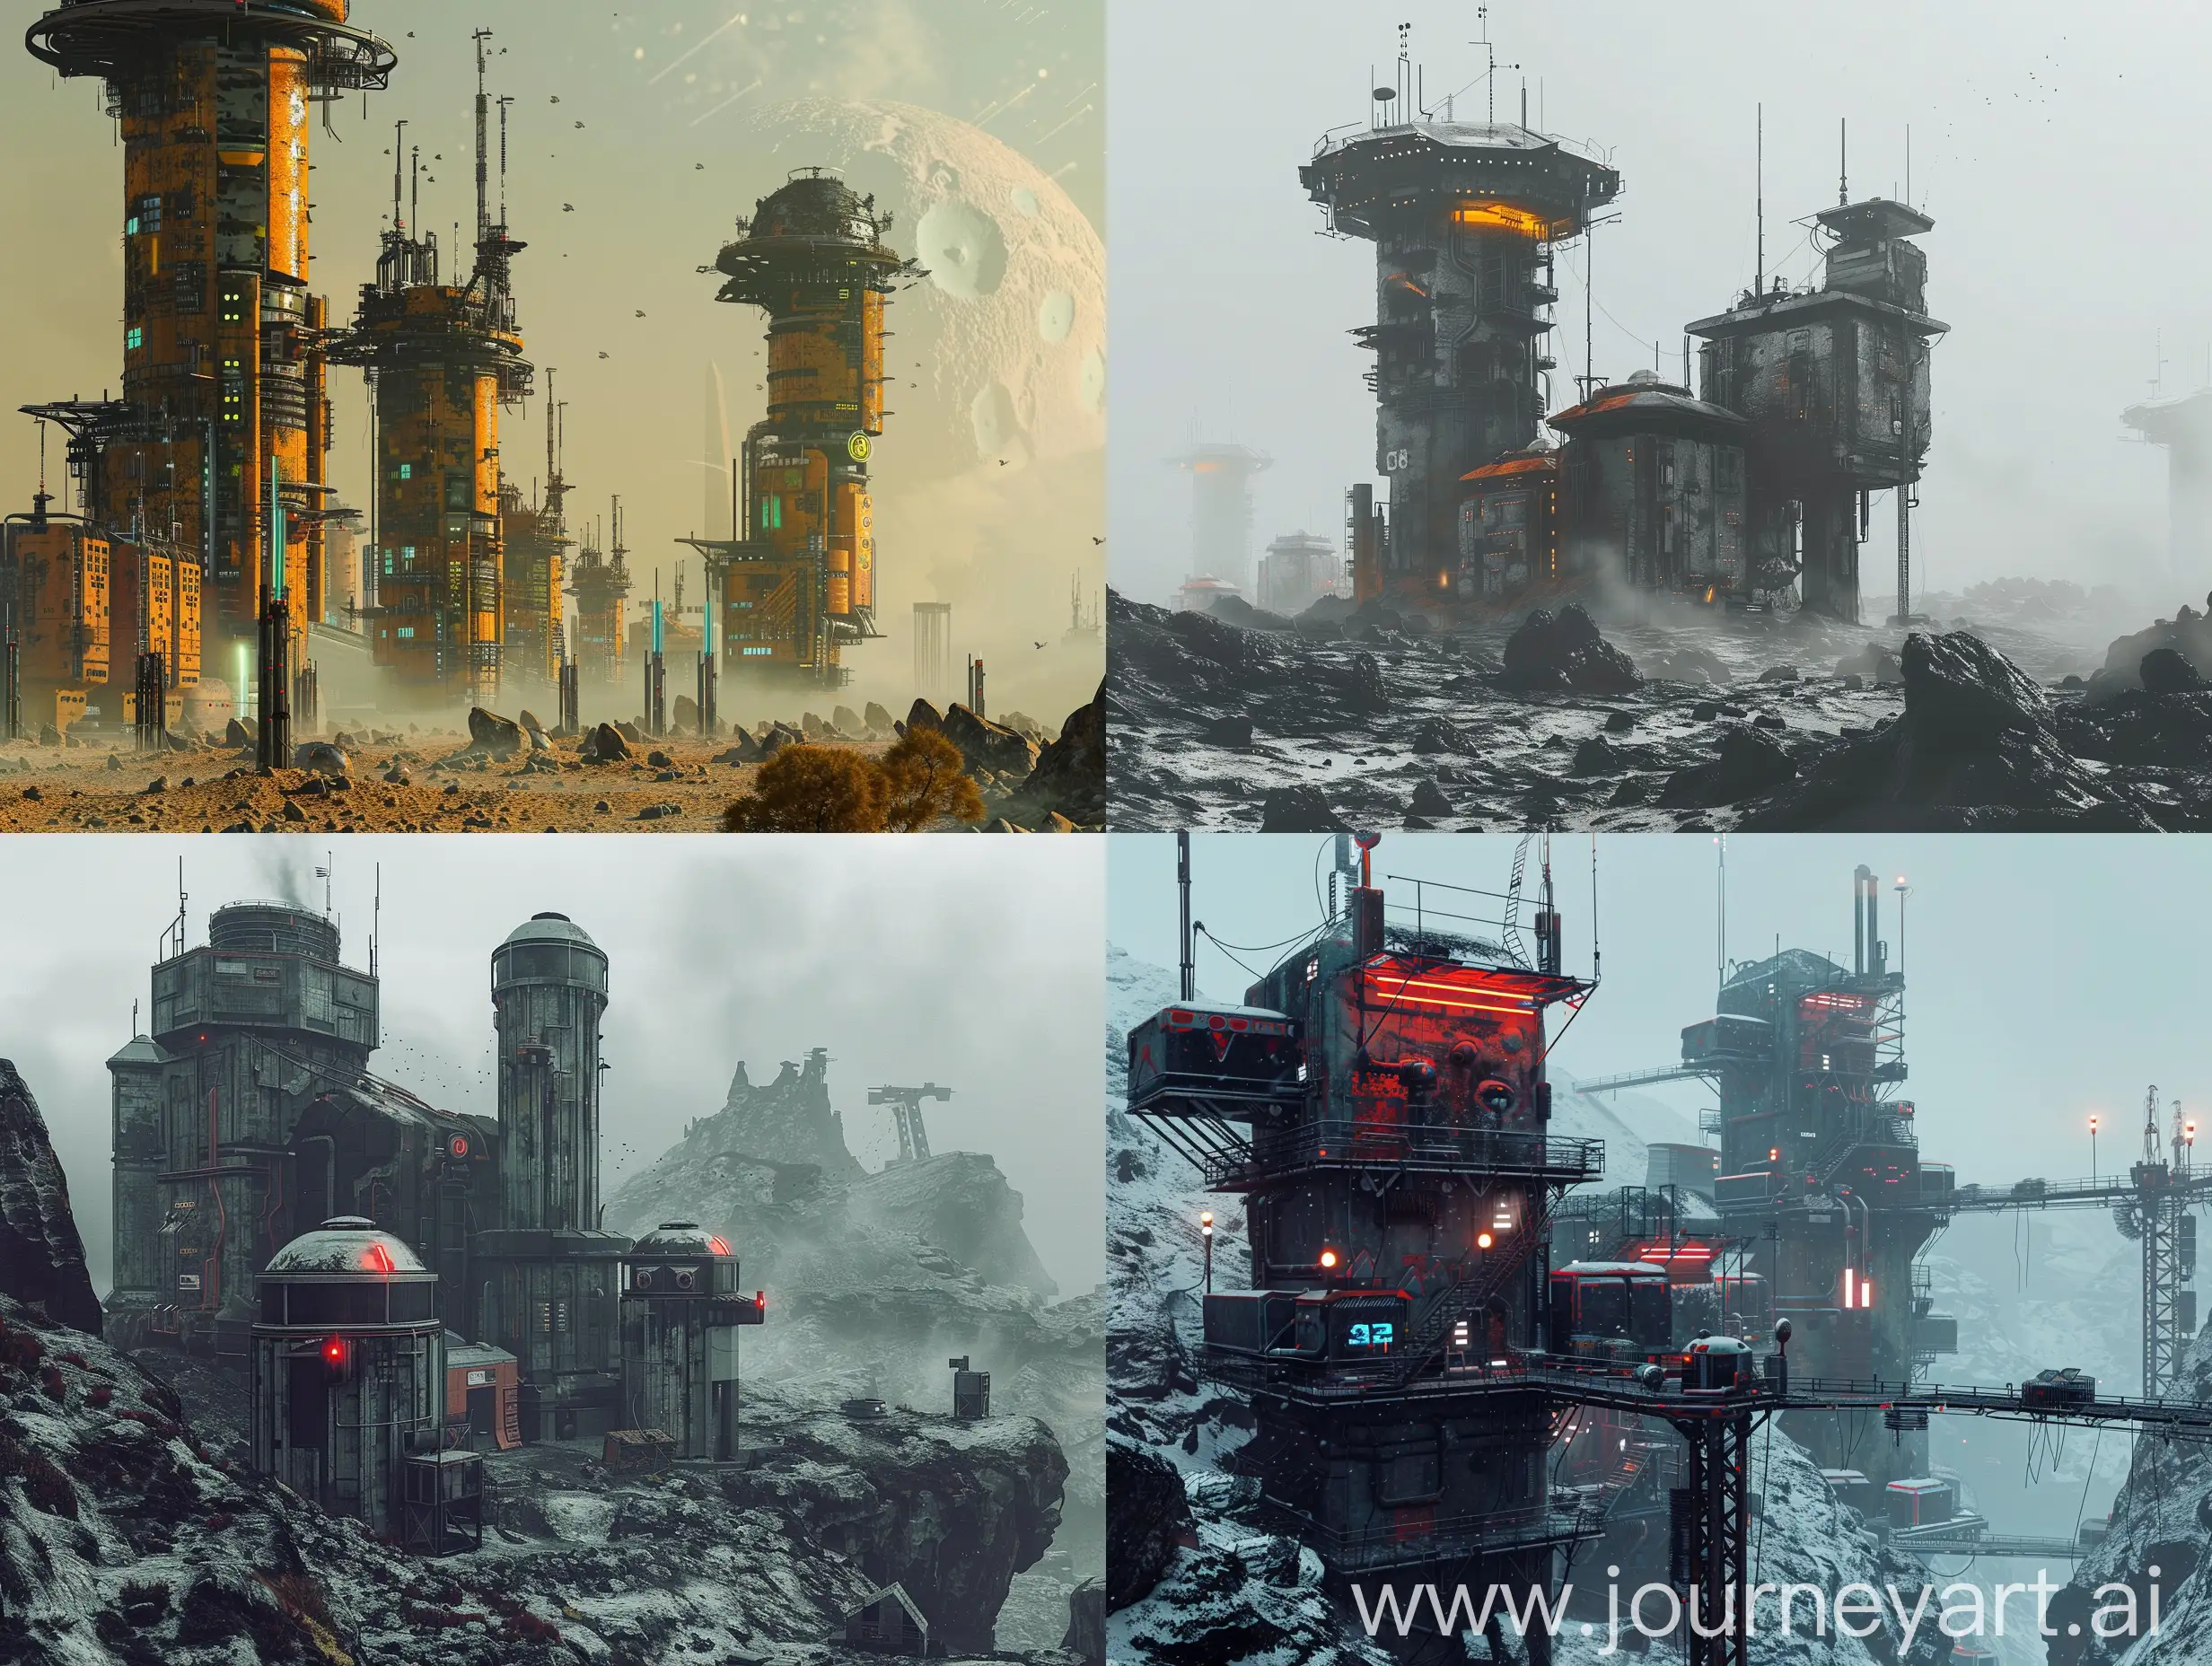 Urban-Outpost-Settlement-on-a-Rocky-World-with-Industrial-Atmosphere